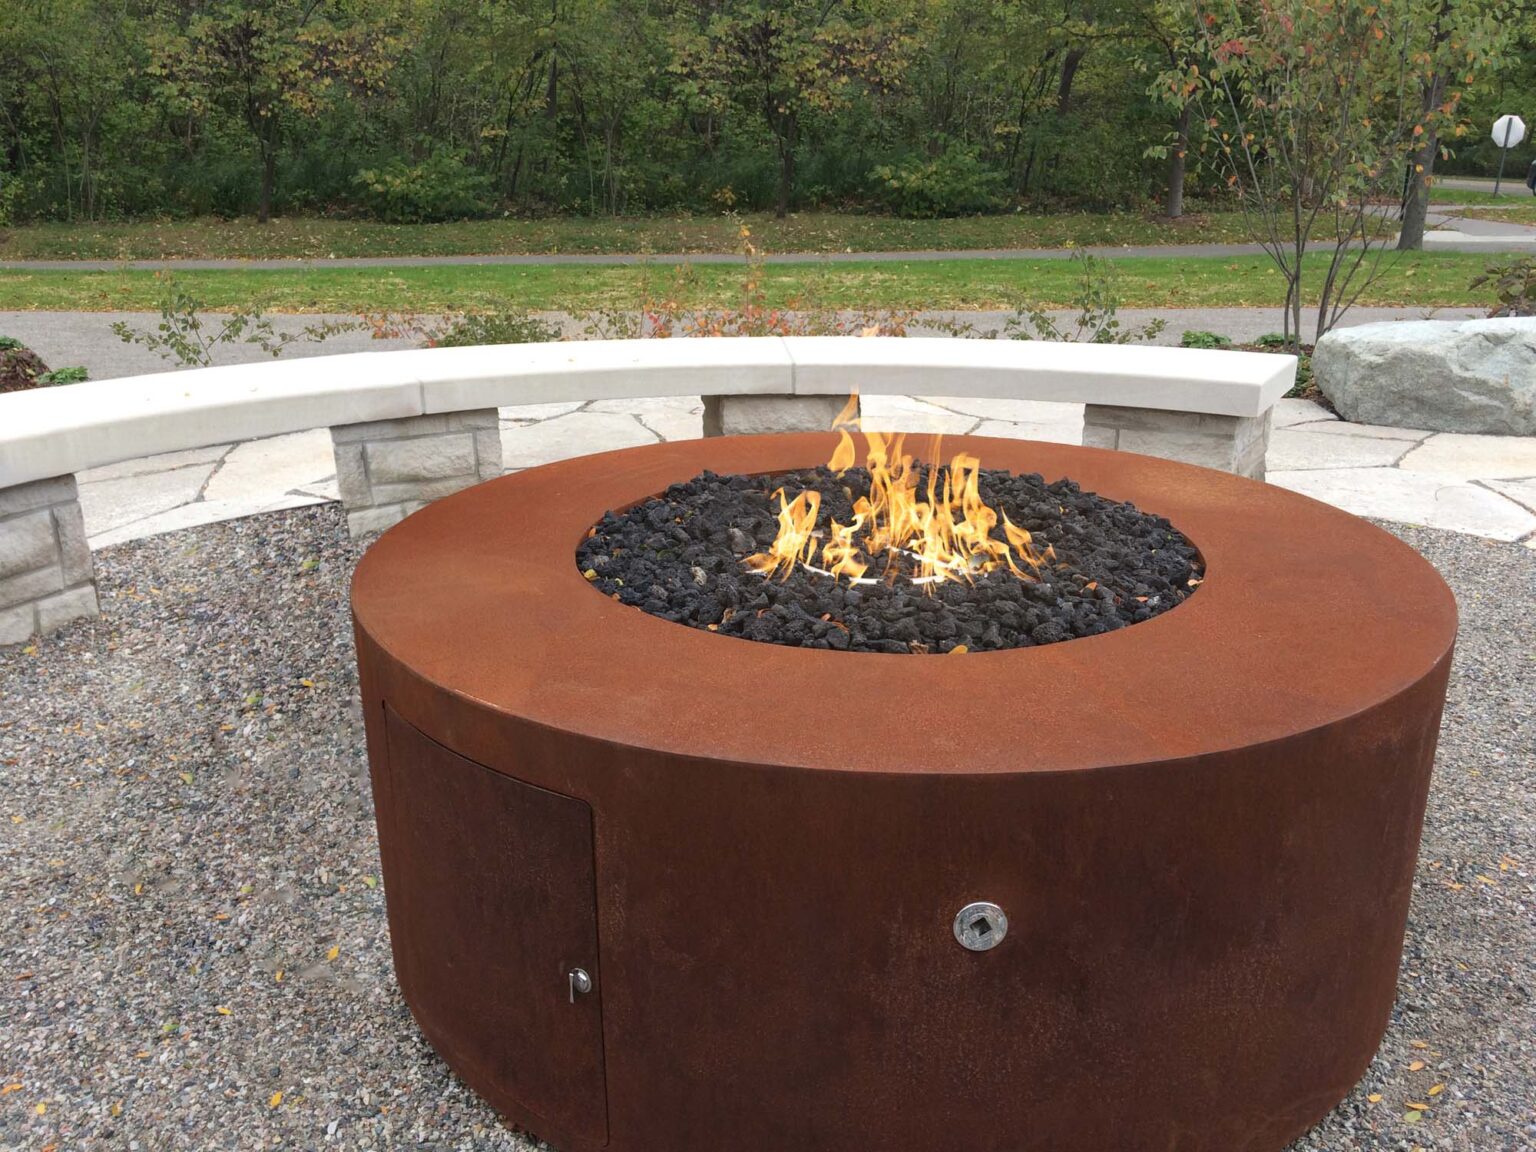 The Outdoor Plus - Unity 48 Inch x 24 Inch Hammered Copper Match Lit Fire Pit - OPT-UNYCP48